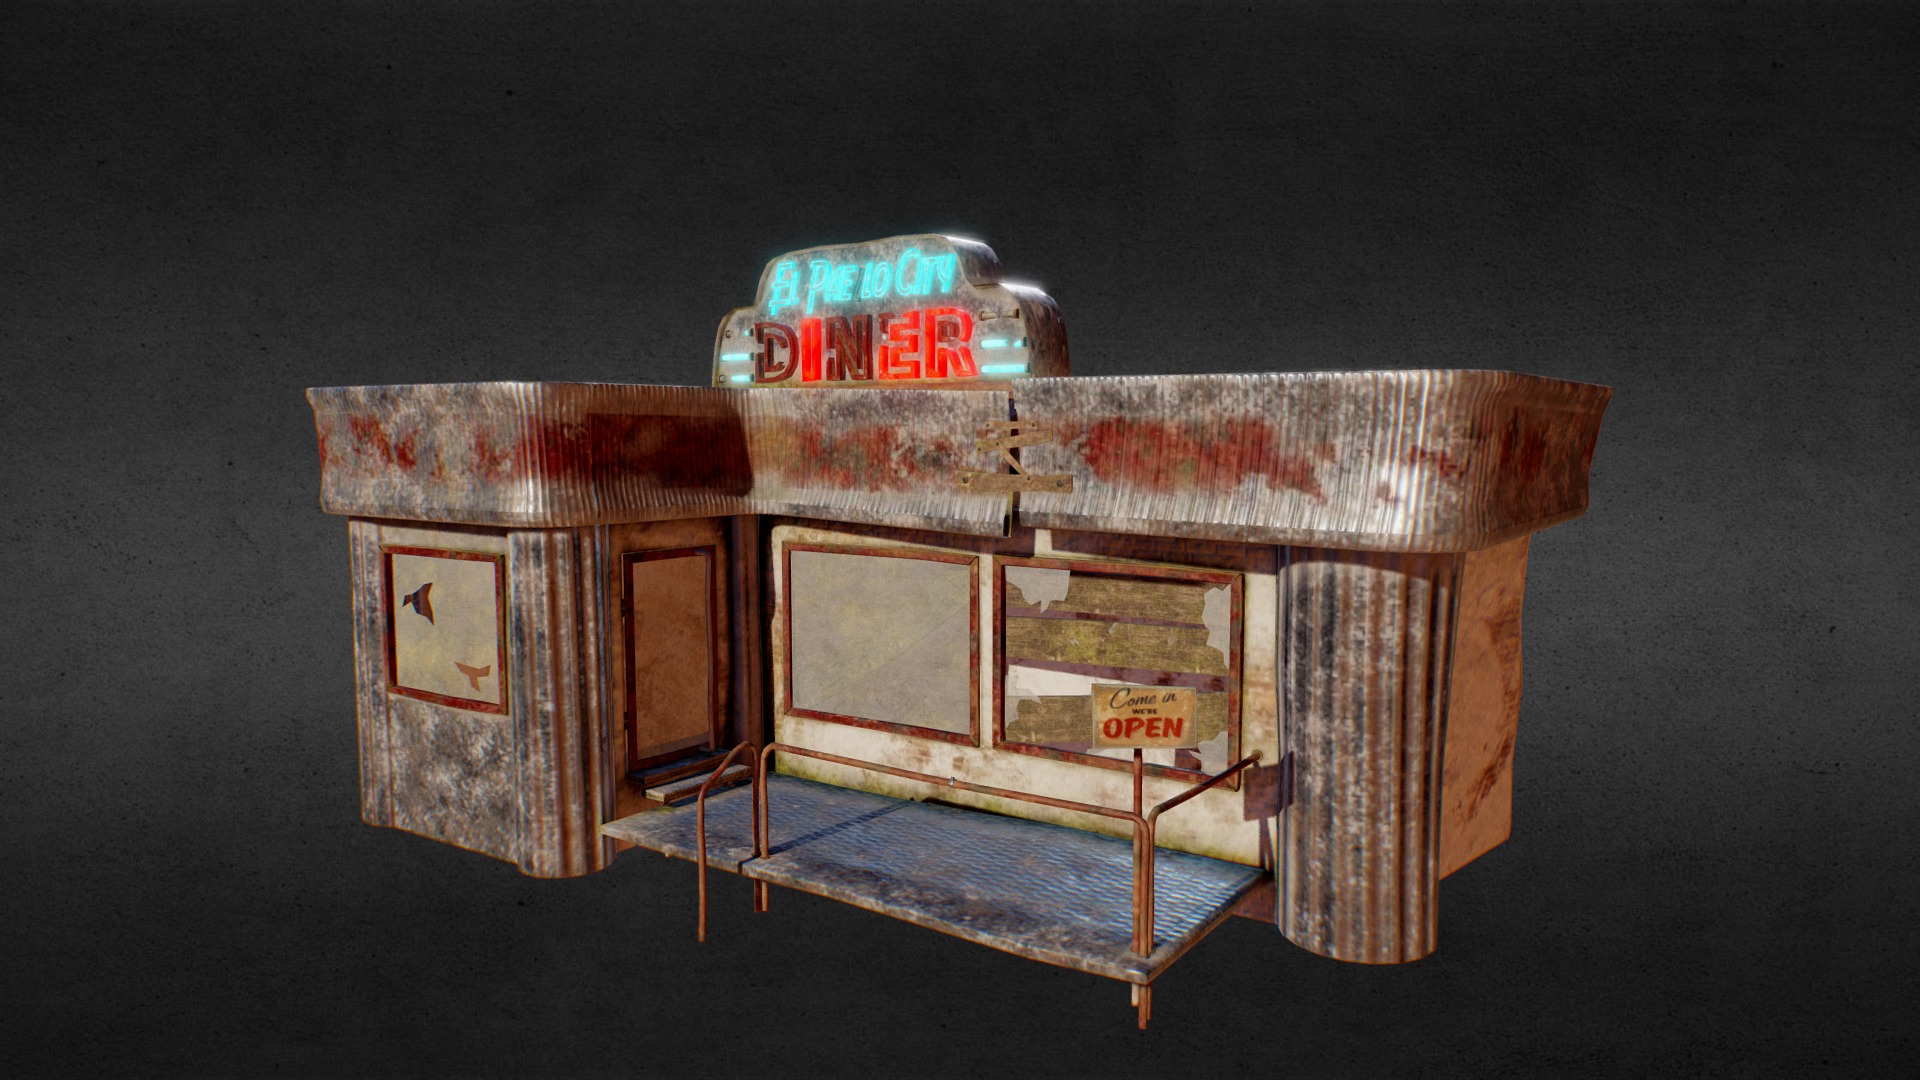 3D model Diner - This is a 3D model of the Diner. The 3D model is about a wooden box with a label on it.